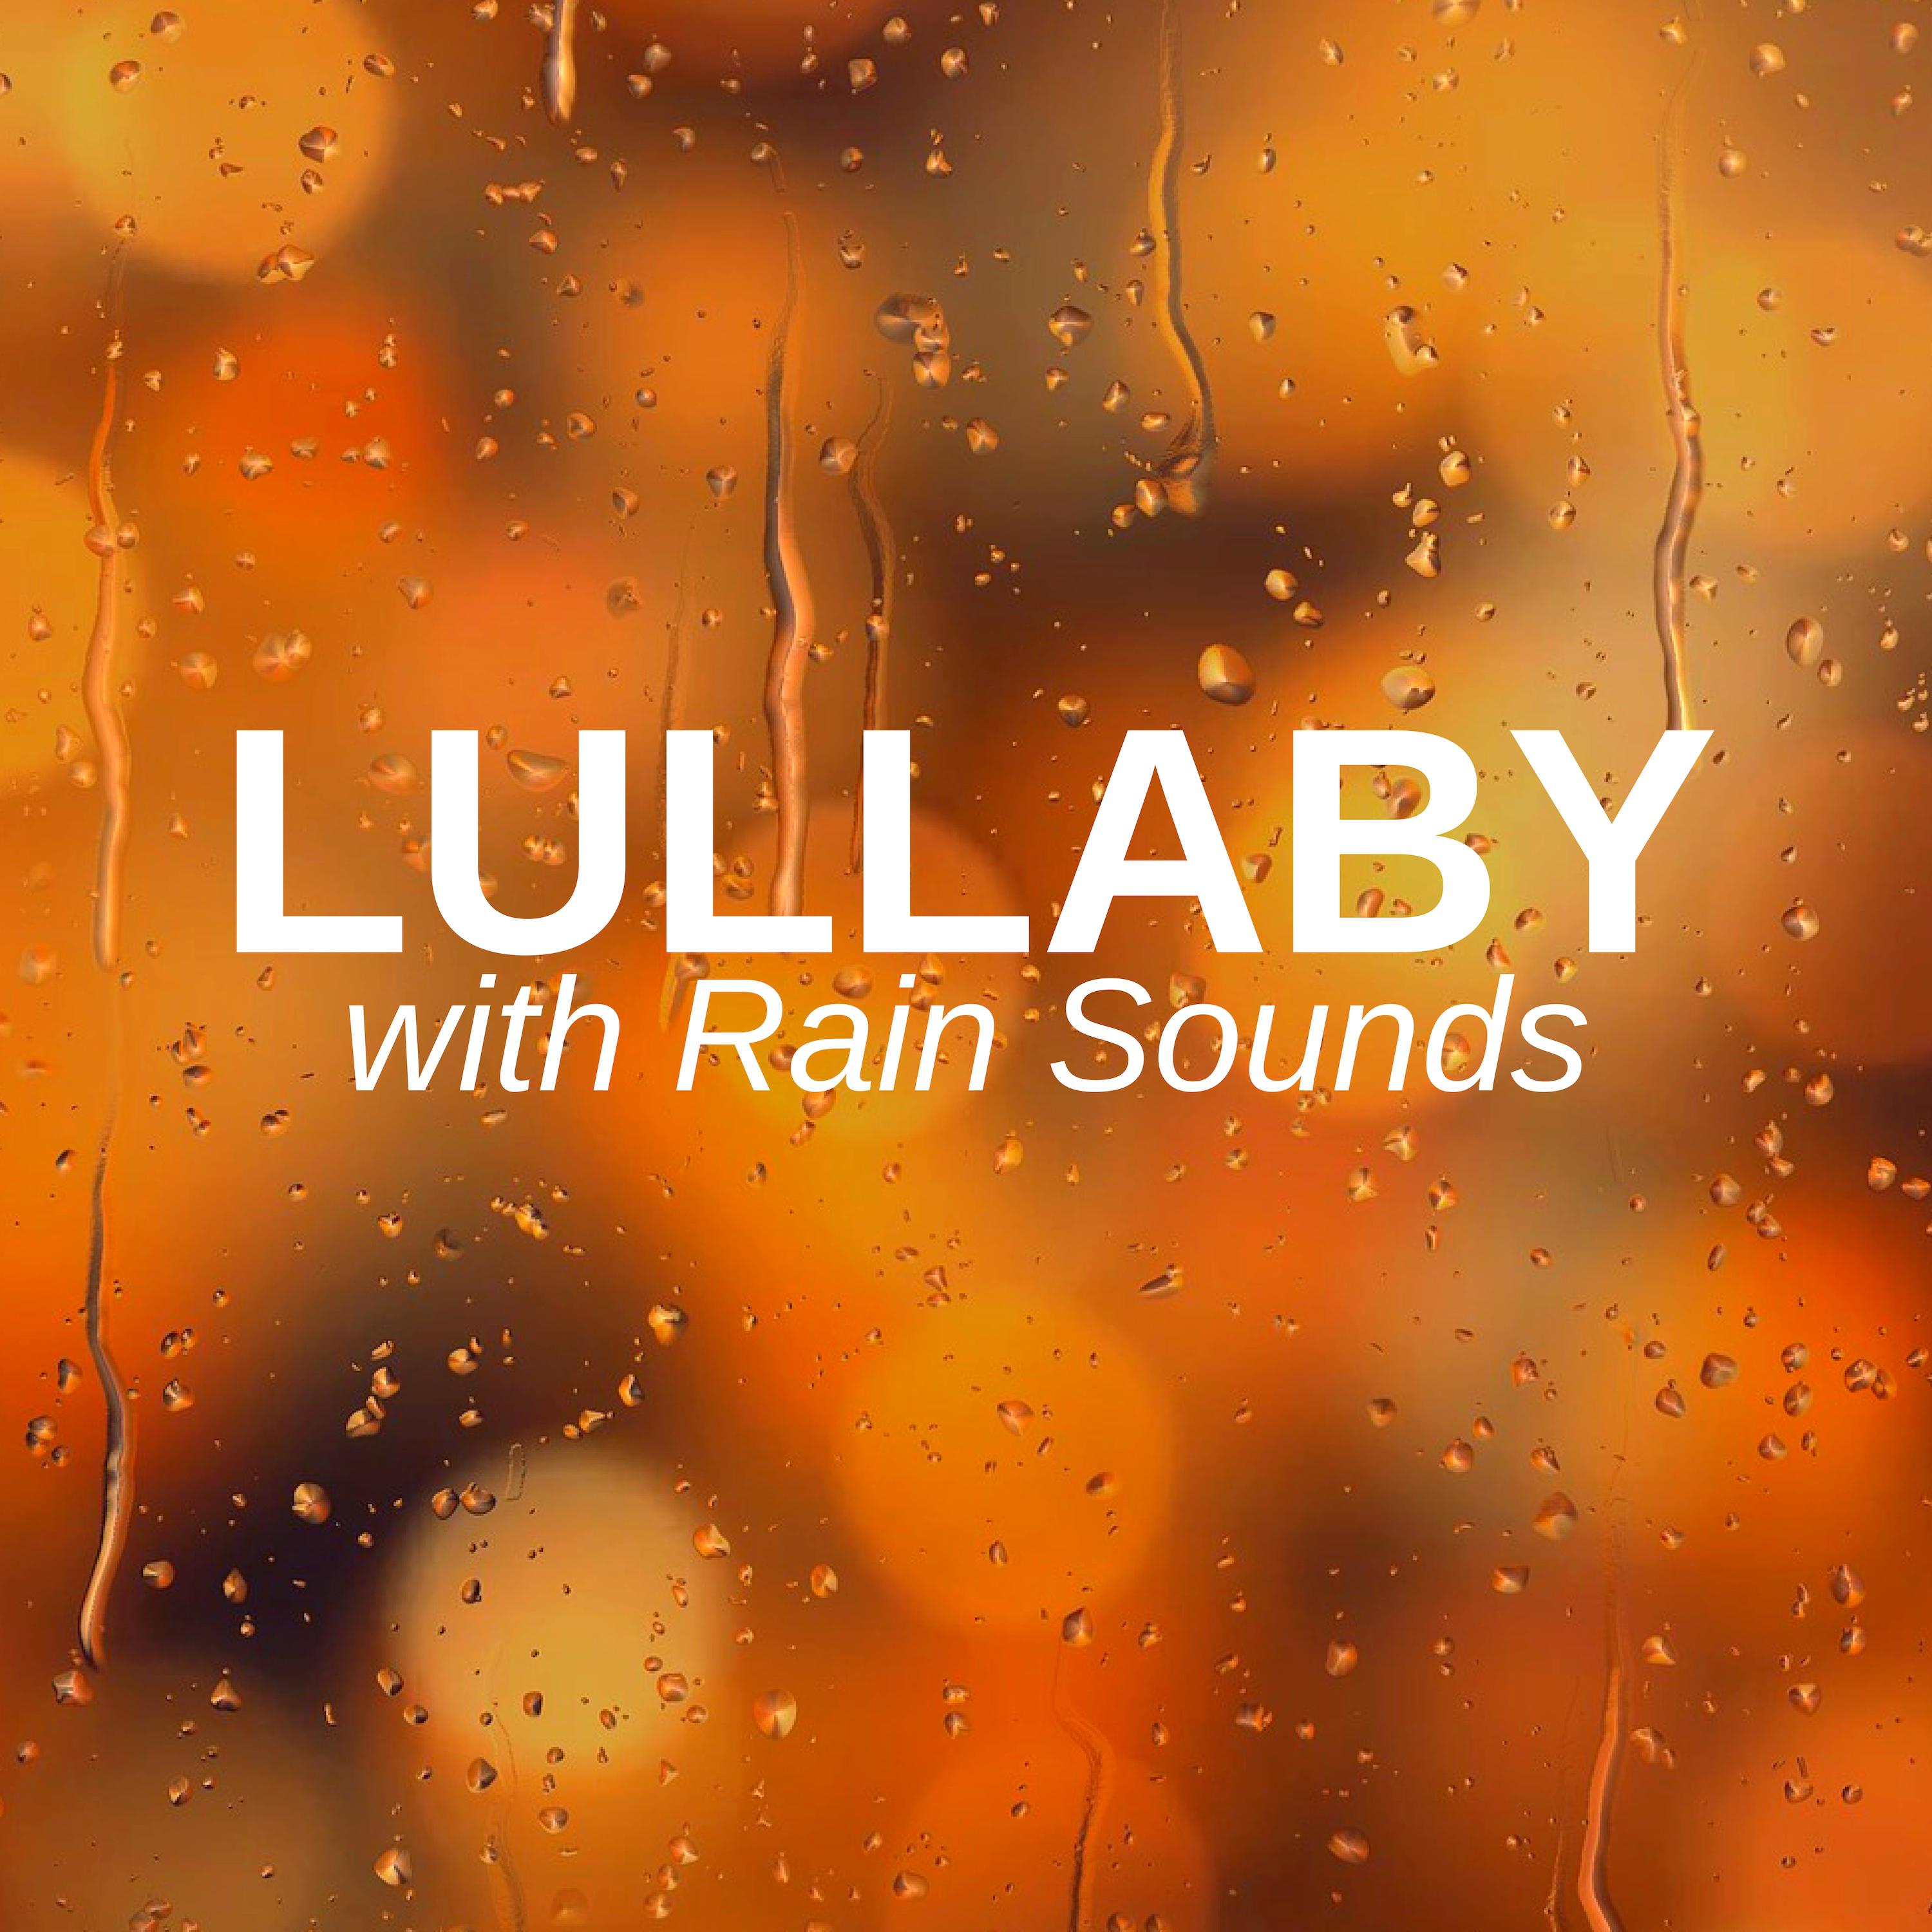 Lullaby with Rain Sounds - Sleeping at Last with Natural Music